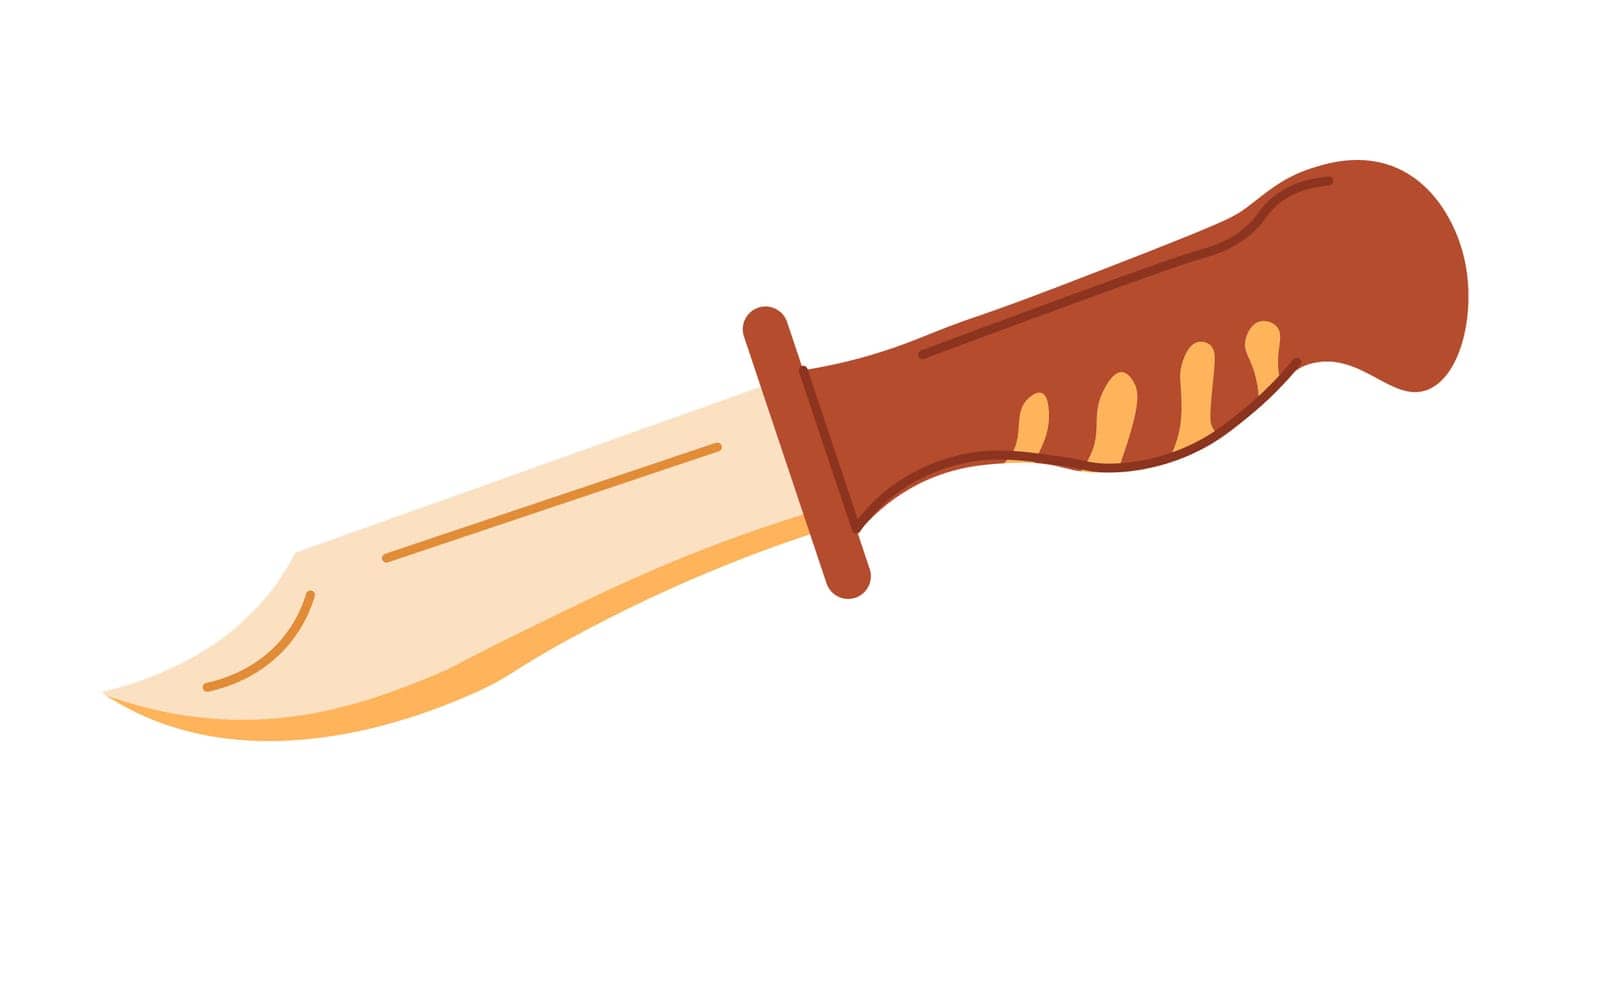 Traveling knife with handle and sharp blade isolated cutting tool or instrument for adventures and cooking outdoors. Preparation of food, chopping and slicing device. Vector in flat style illustration